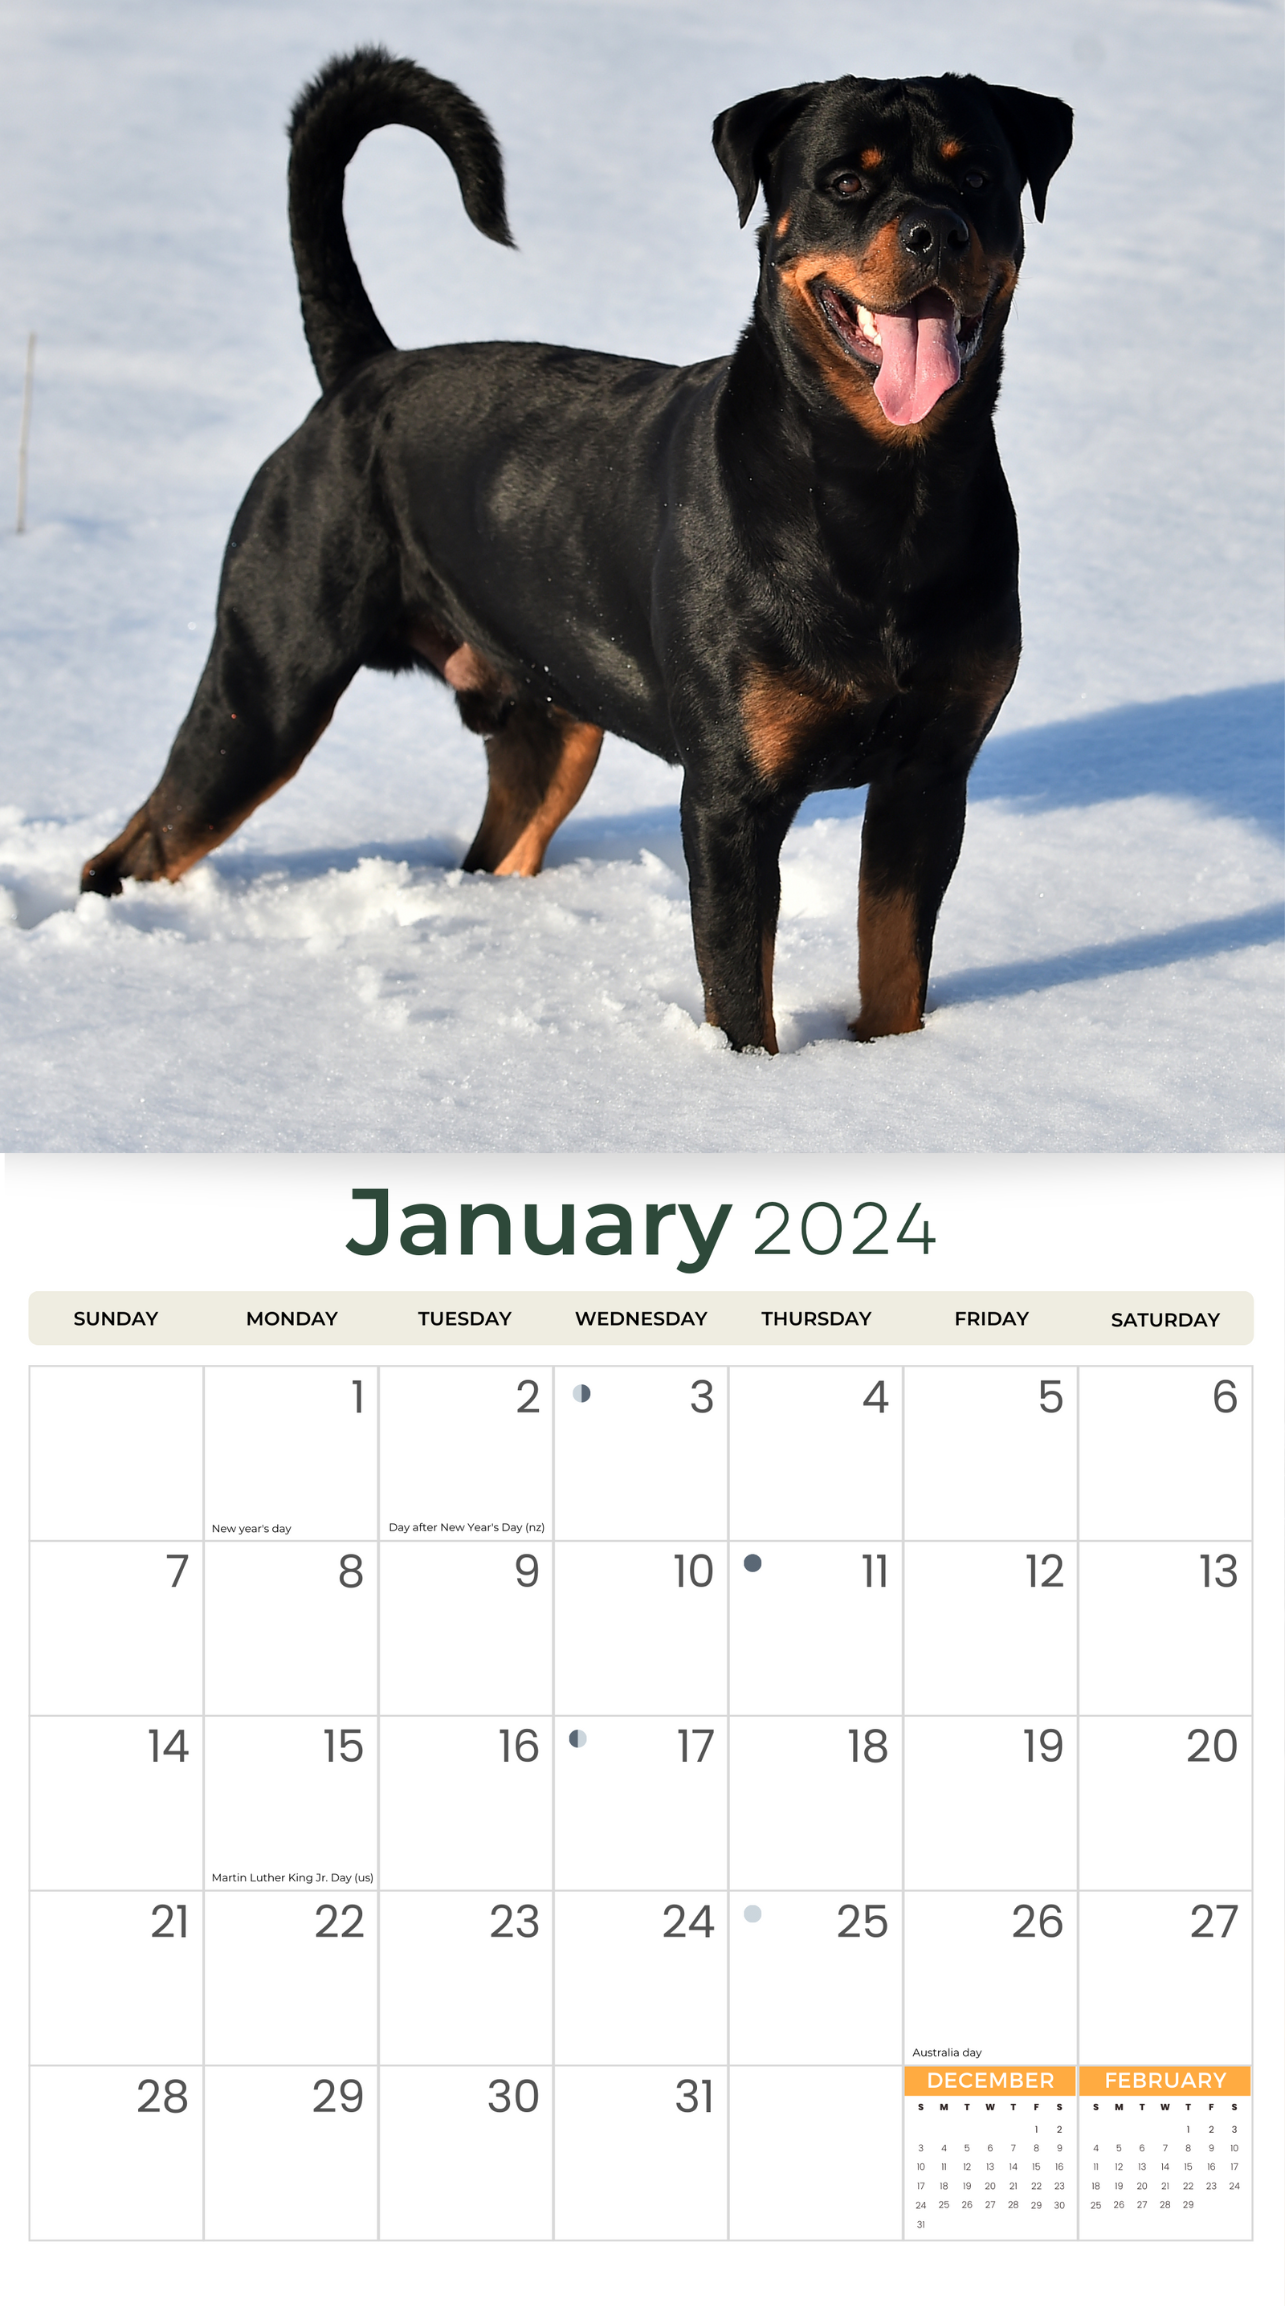 2024 Rottweilers Dogs & Puppies - Deluxe Wall Calendar by Just Calendars - 16 Month - Plastic Free